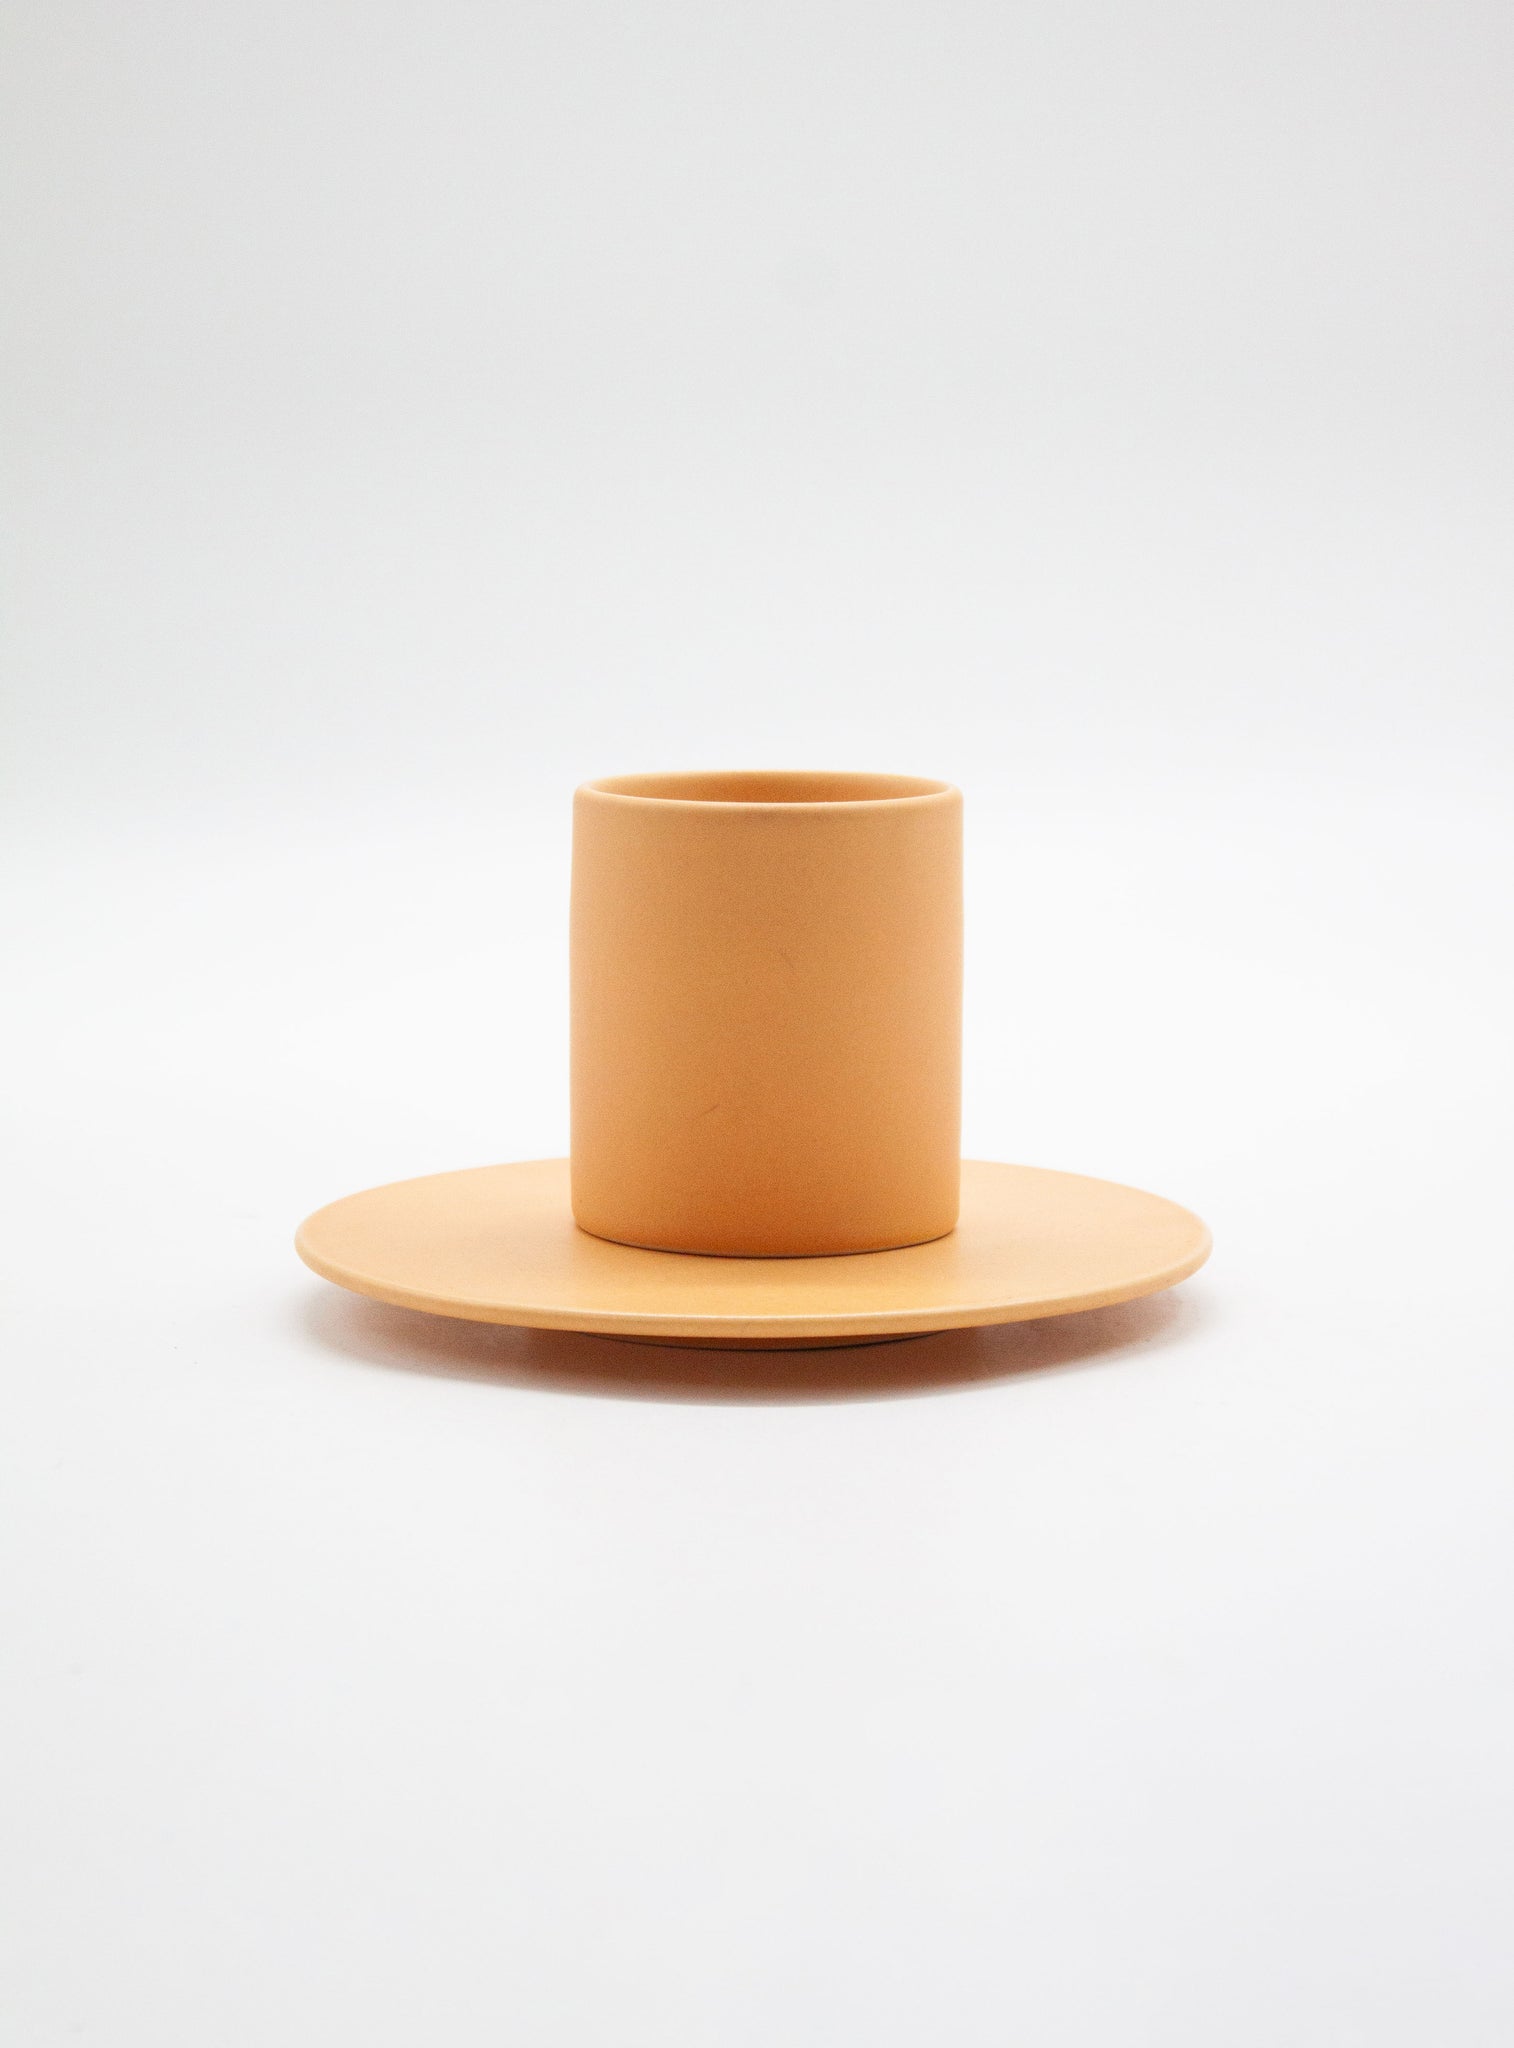 Cor Unum Tumble Coffee Cups & Saucers by Geert Lap